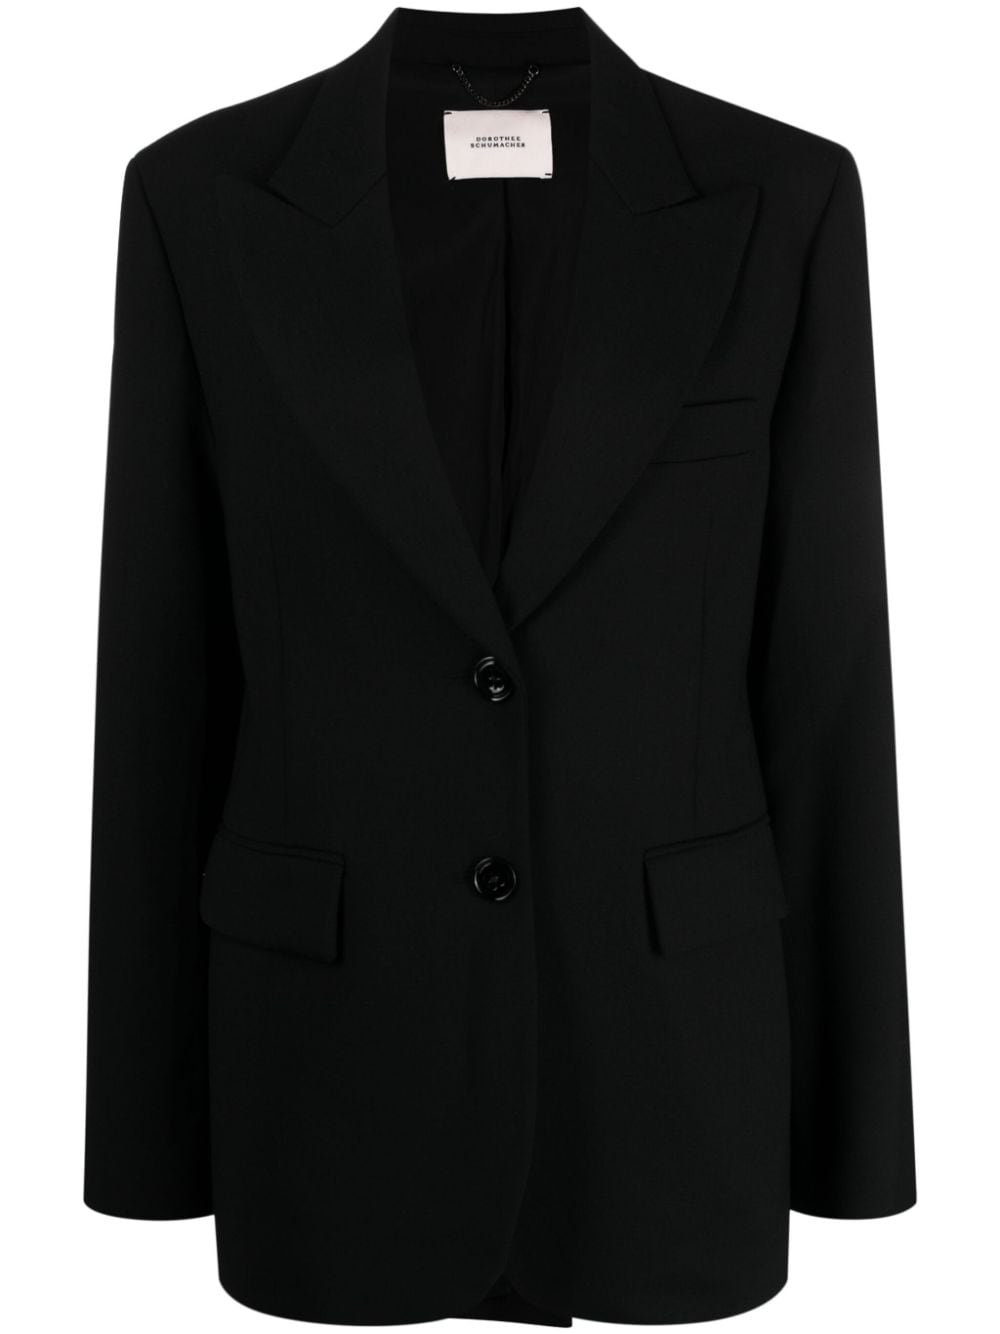 Dorothee Schumacher single-breasted peaked blazer - Black von Dorothee Schumacher